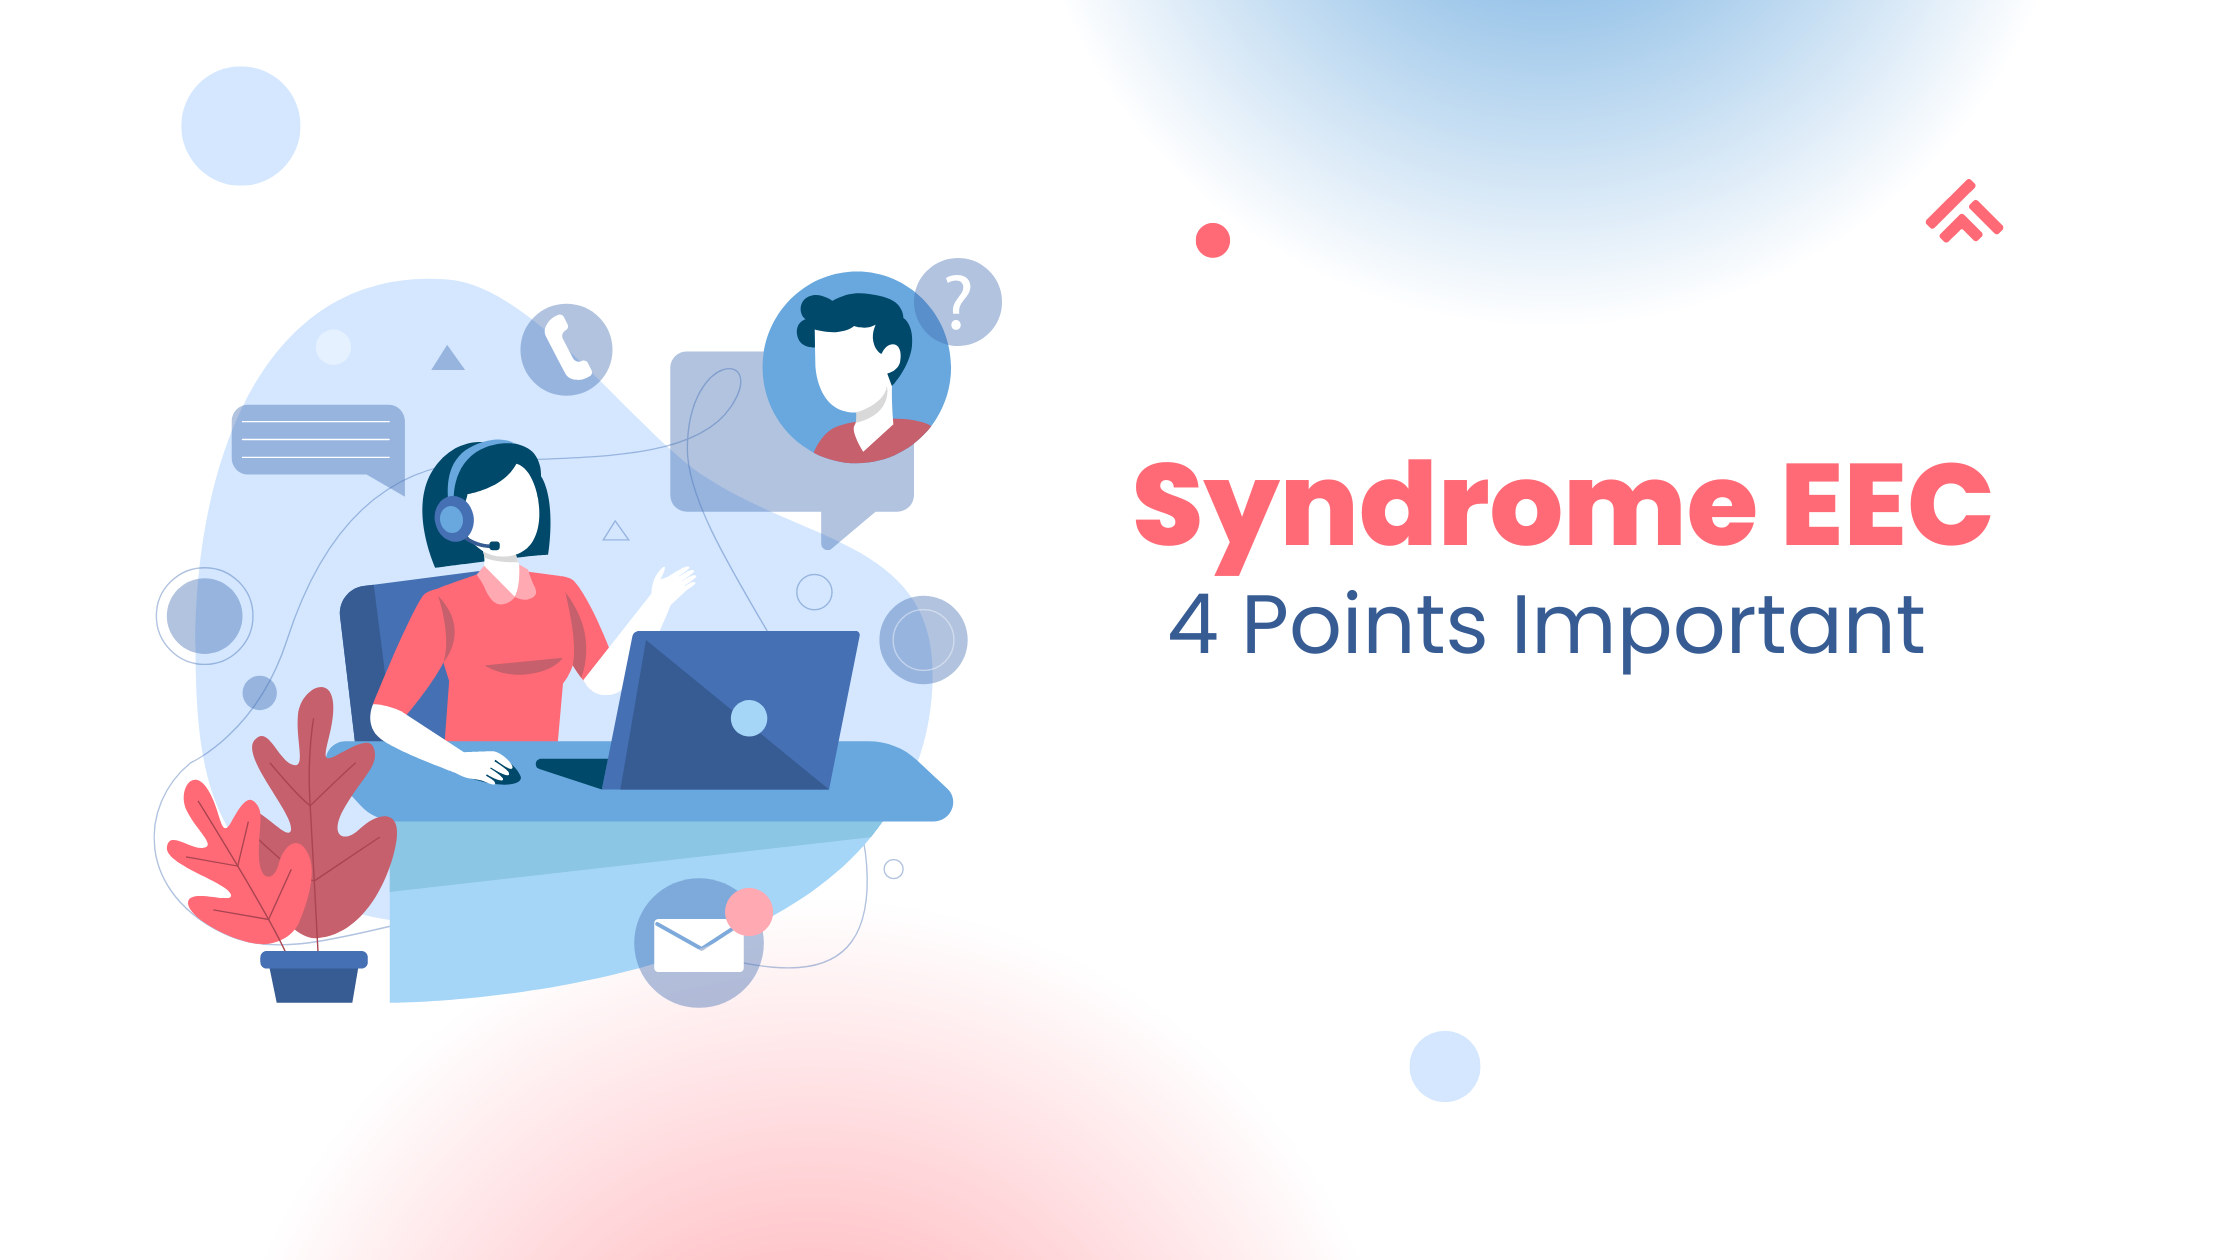 Syndrome EEC | 4 Points Important